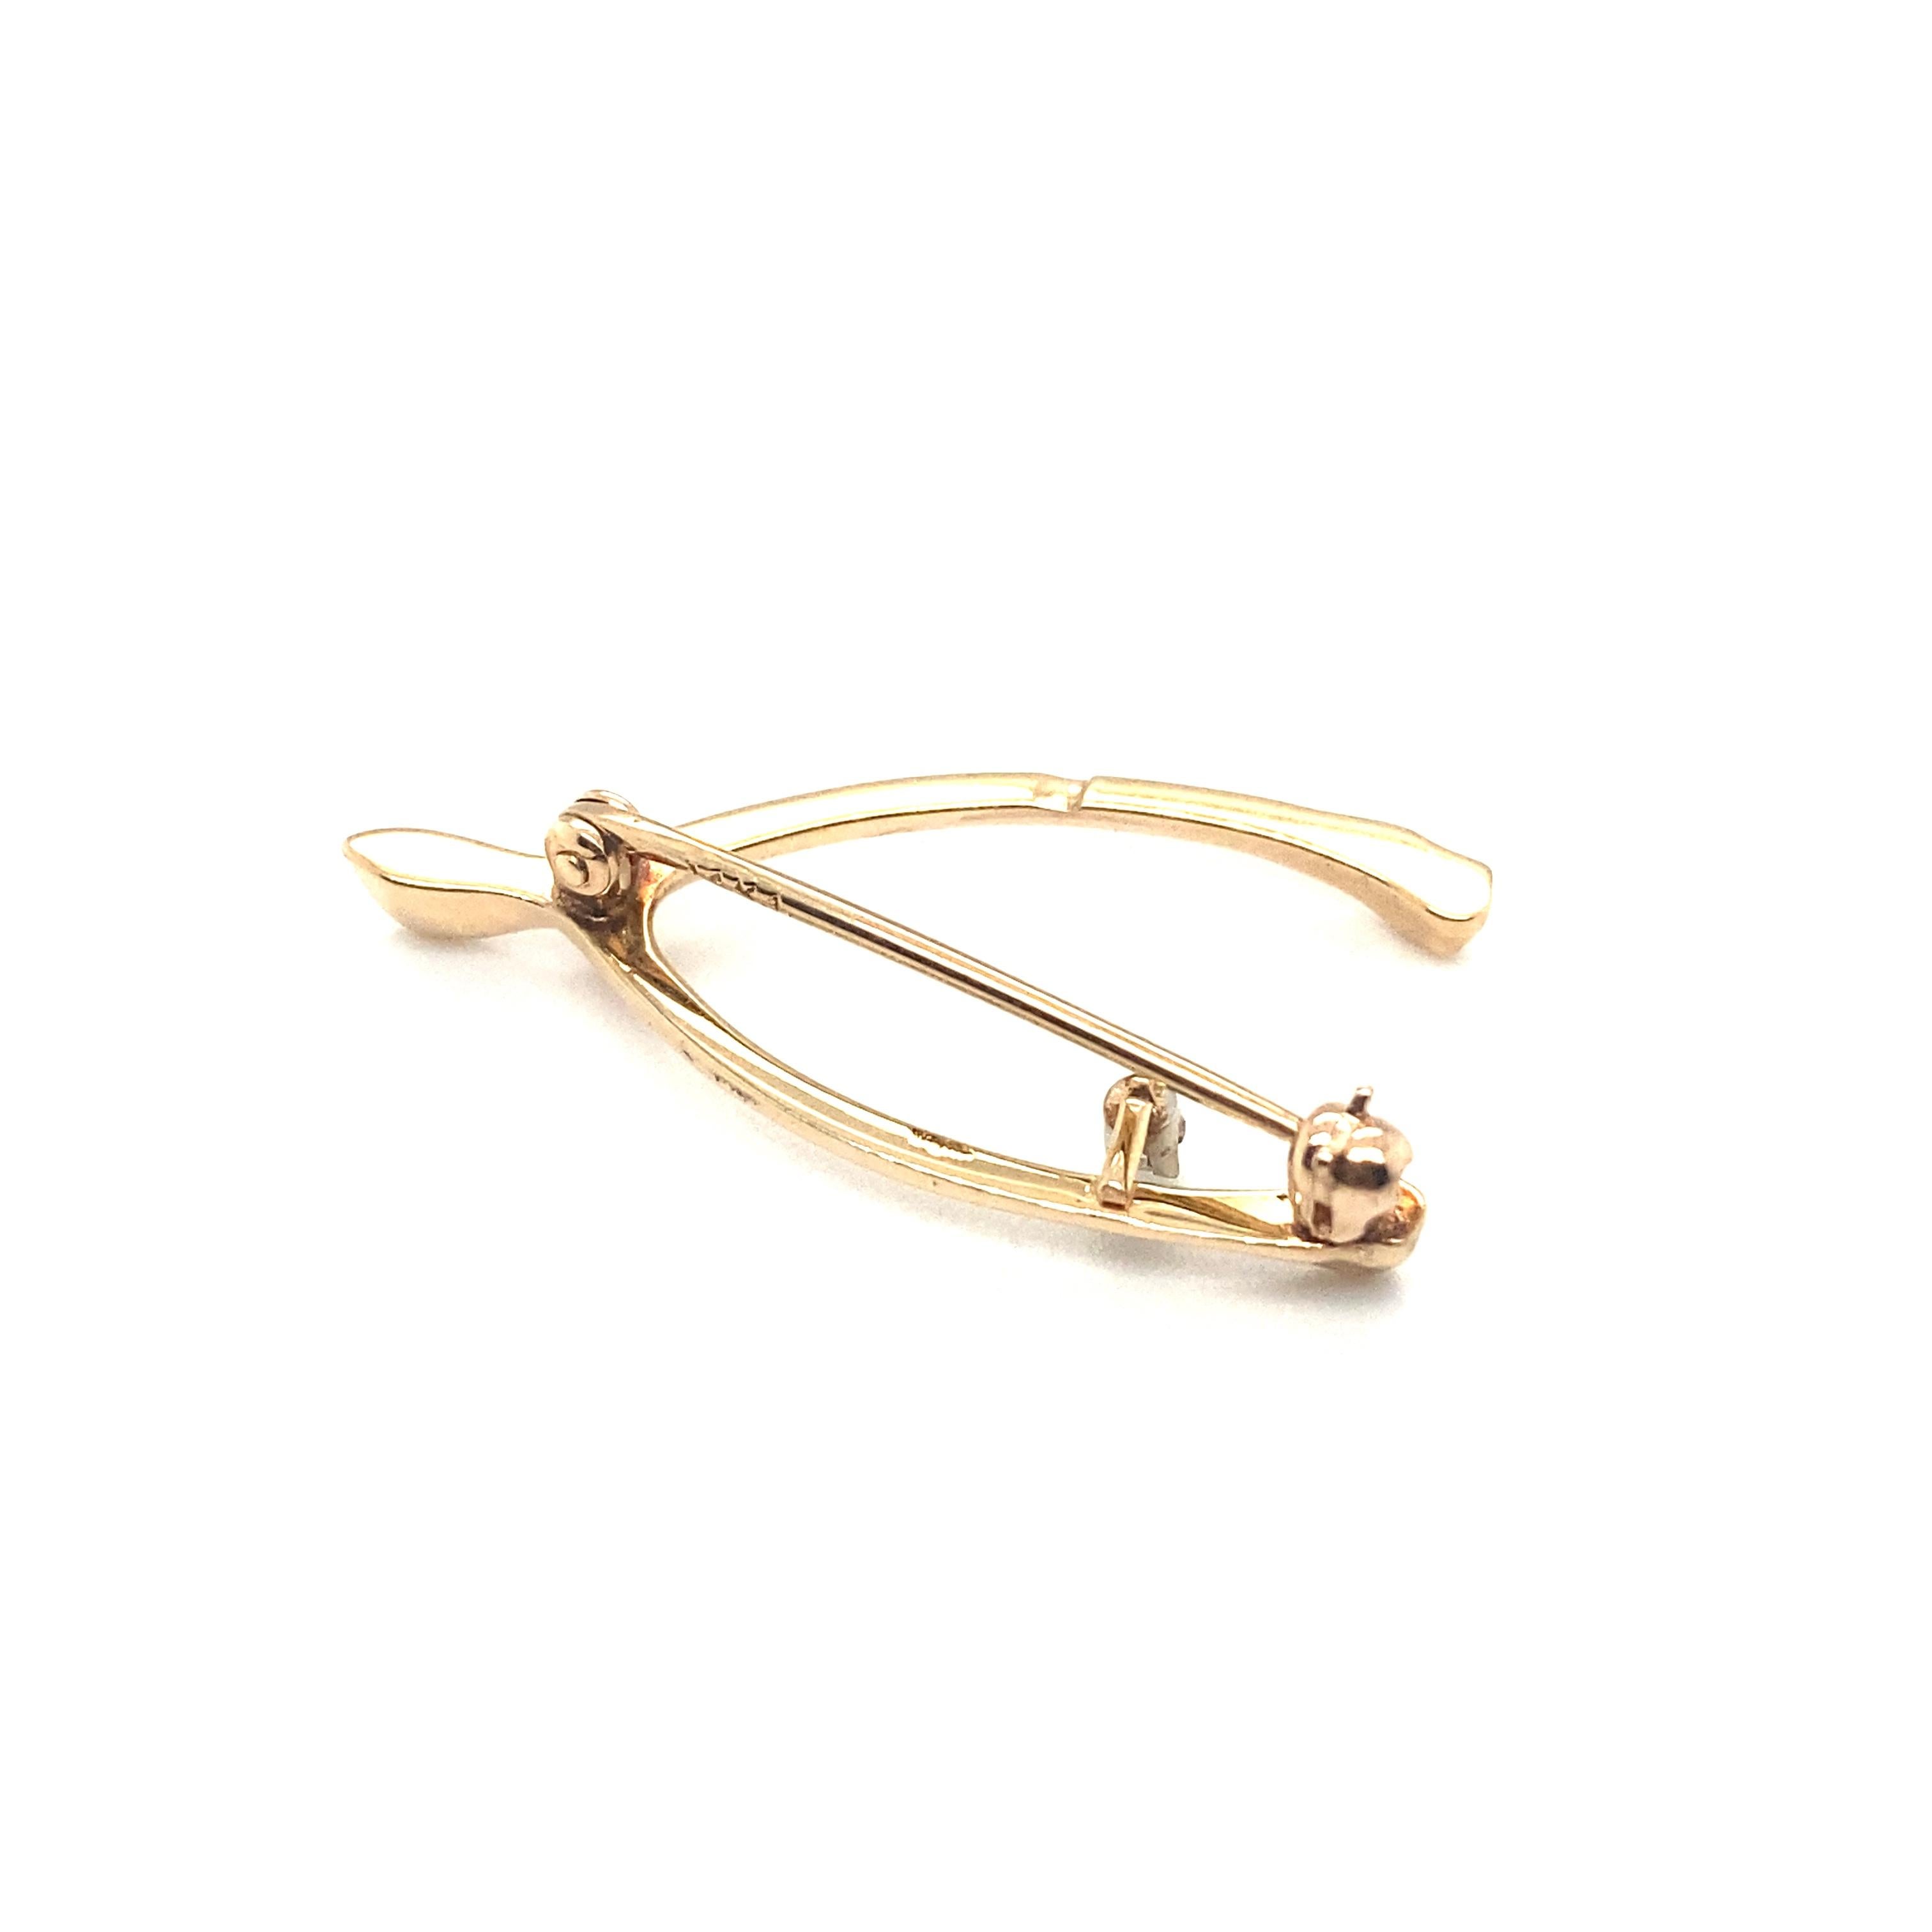 Circa 1960s Diamond Wishbone Lucky Charm Brooch in 14 Karat Gold In Excellent Condition For Sale In Atlanta, GA